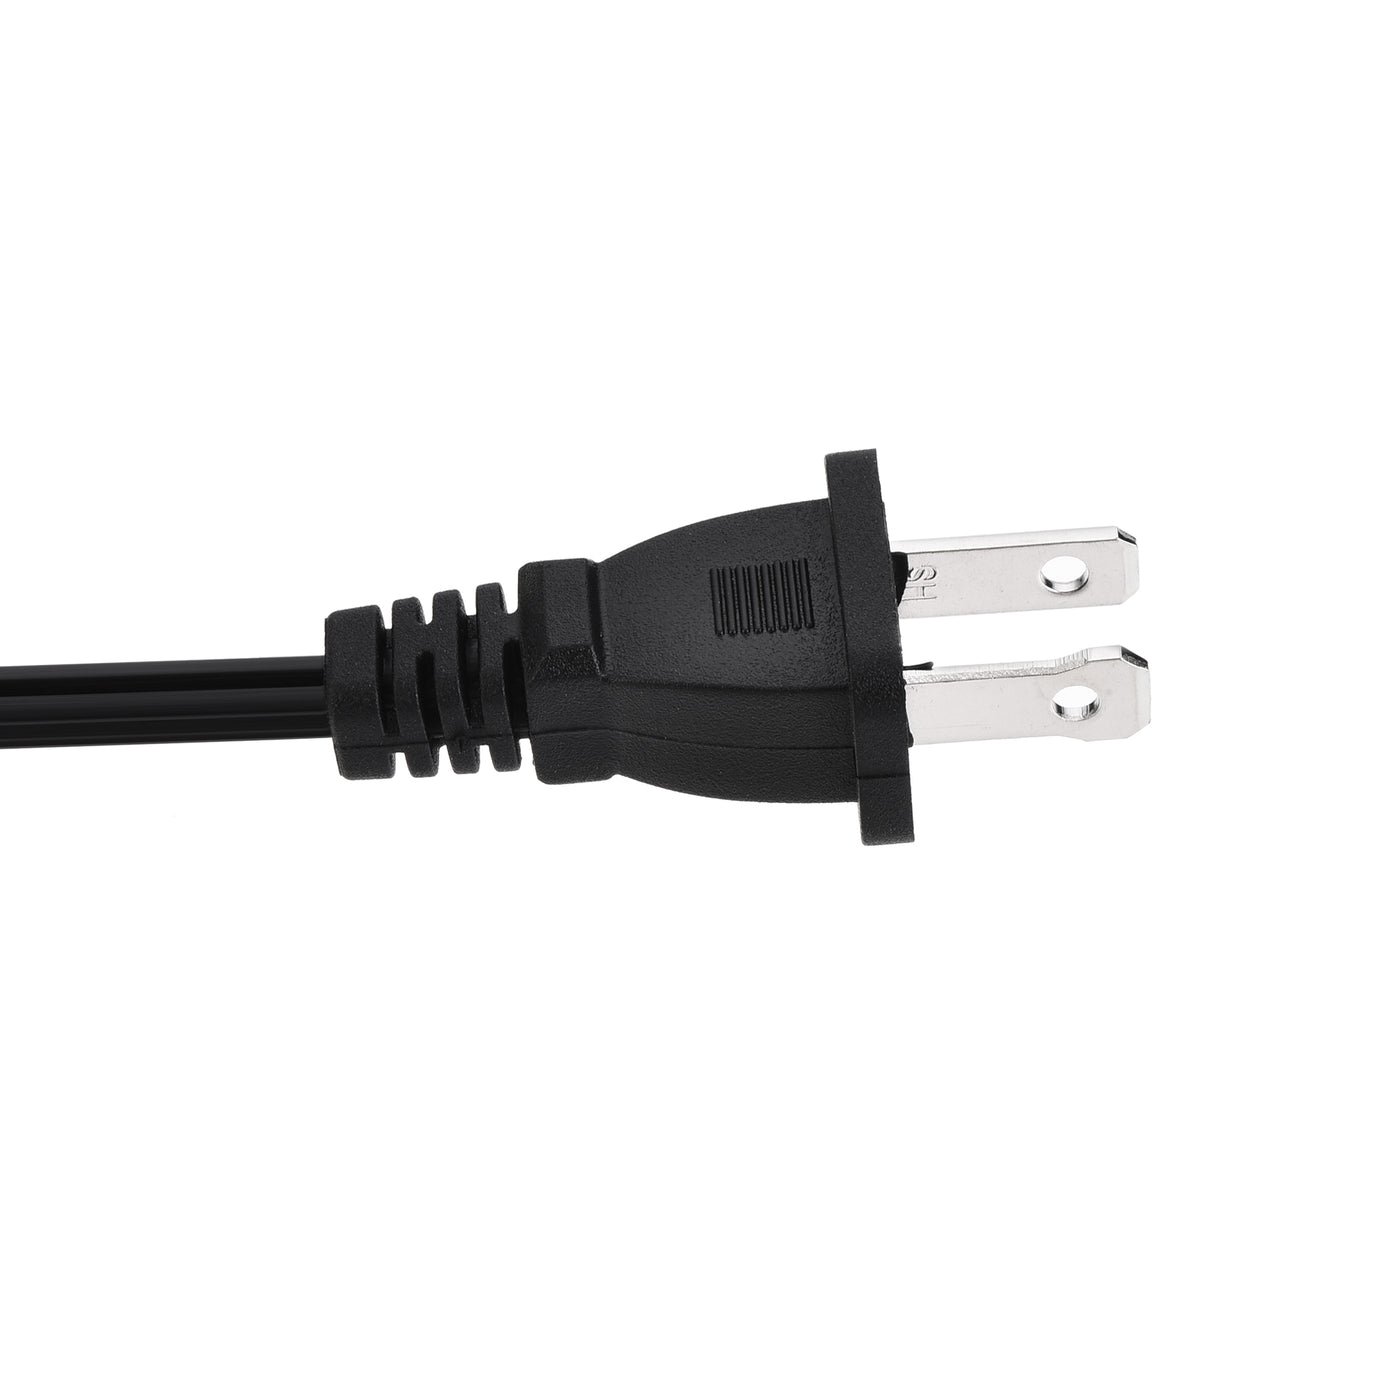 uxcell Uxcell US Plug Lamp Cord, SPT-2 18AWG Power Wire 3.5M Black, UL Listed, Replacement Lamp Repair Part